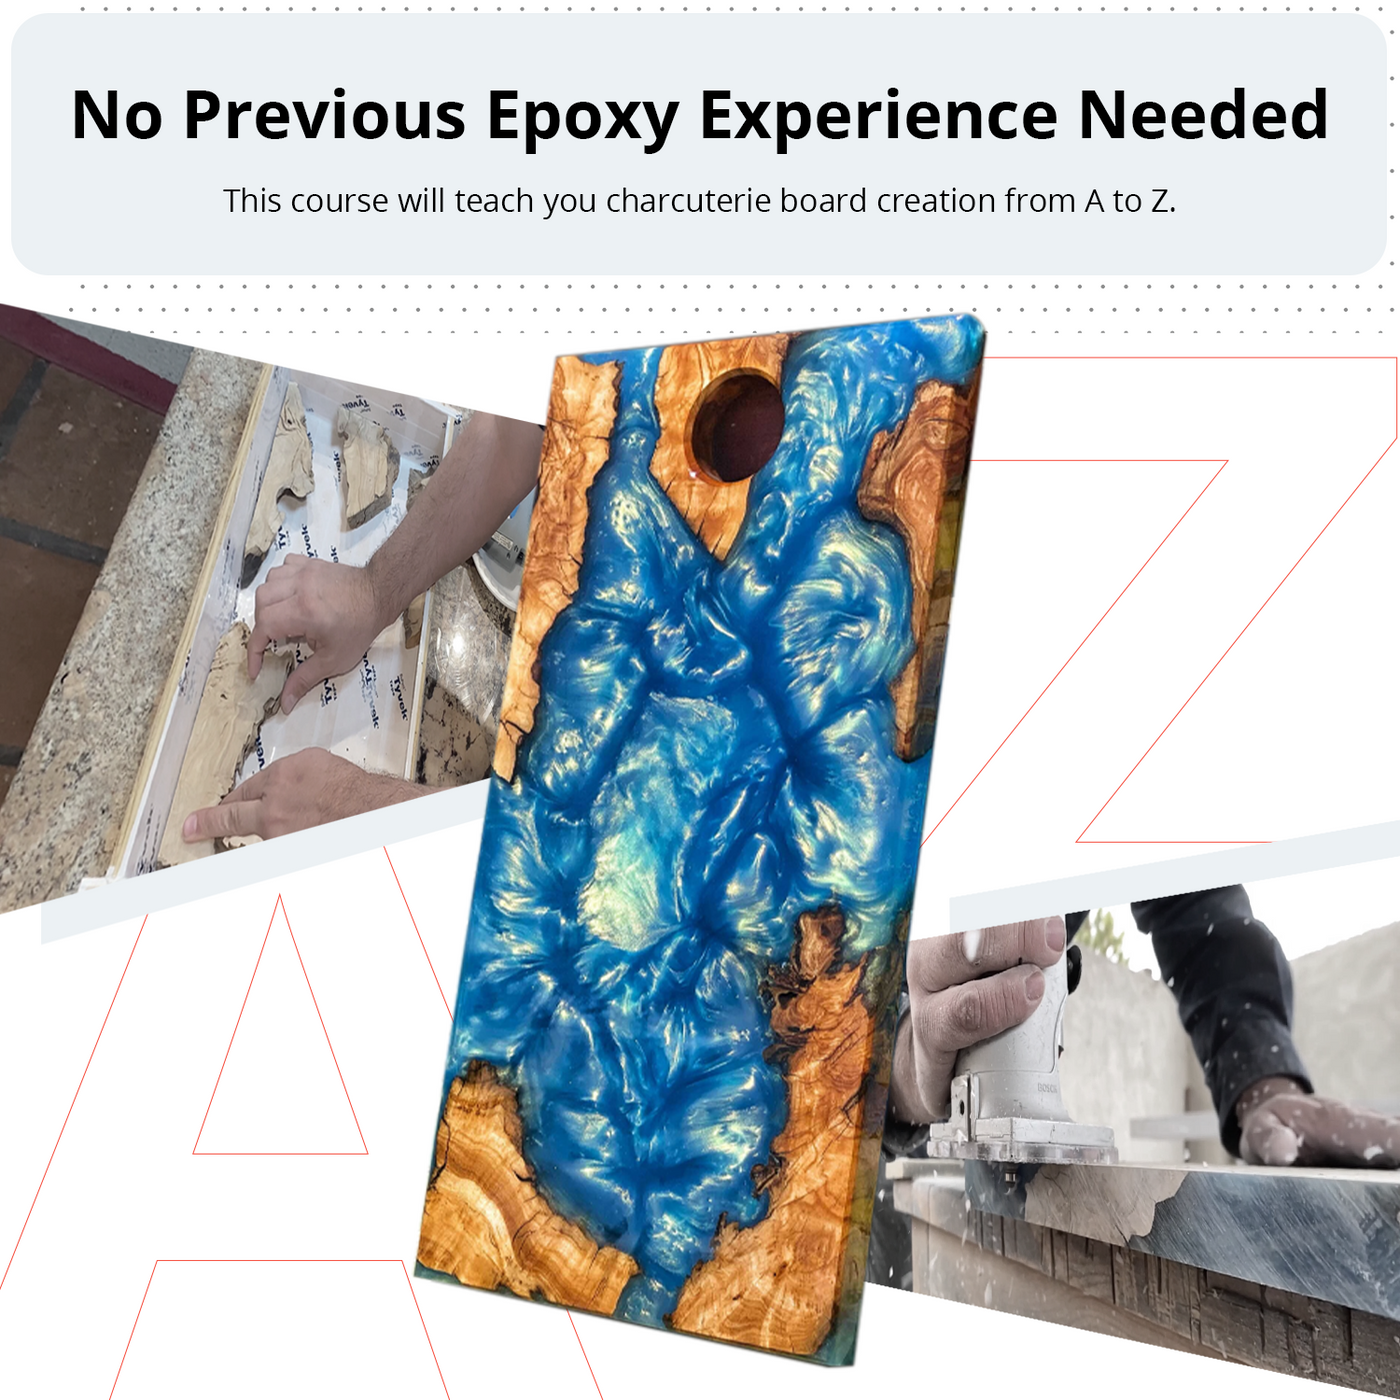 Upstart Epoxy Resin Kit DIY - Made in USA - Ultra Crystal Clear 2 Part  Formulation - Perfect Casting Resin for Counter, Table Top, Wood Bar Top,  Art